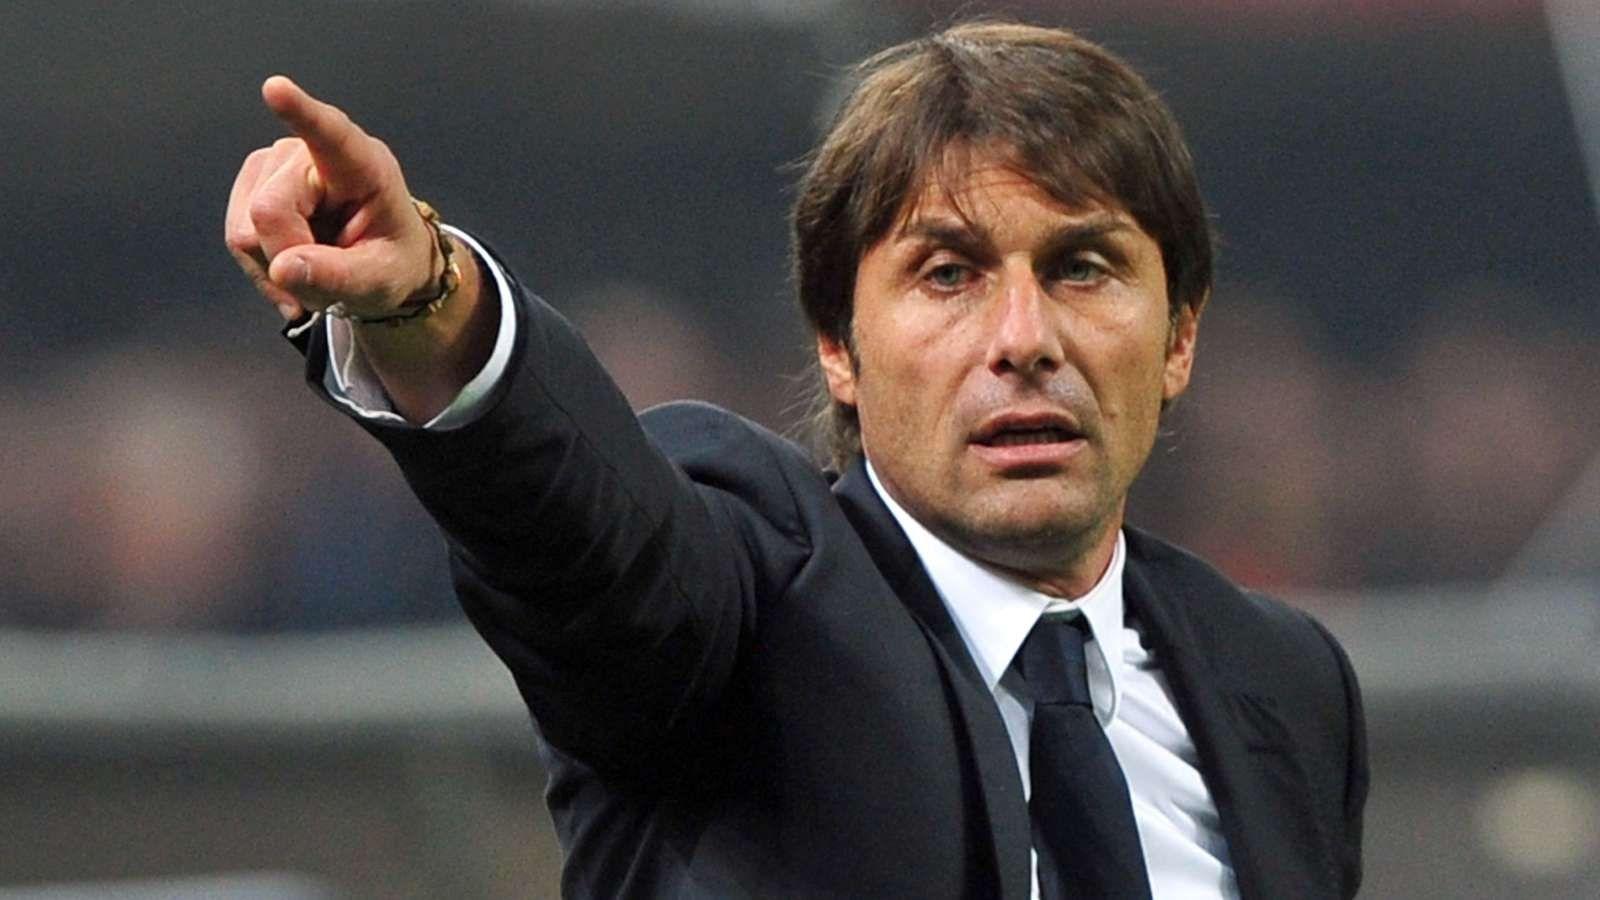 Antonio Conte Coached Chelsea's Official Season From 2016 to 2017